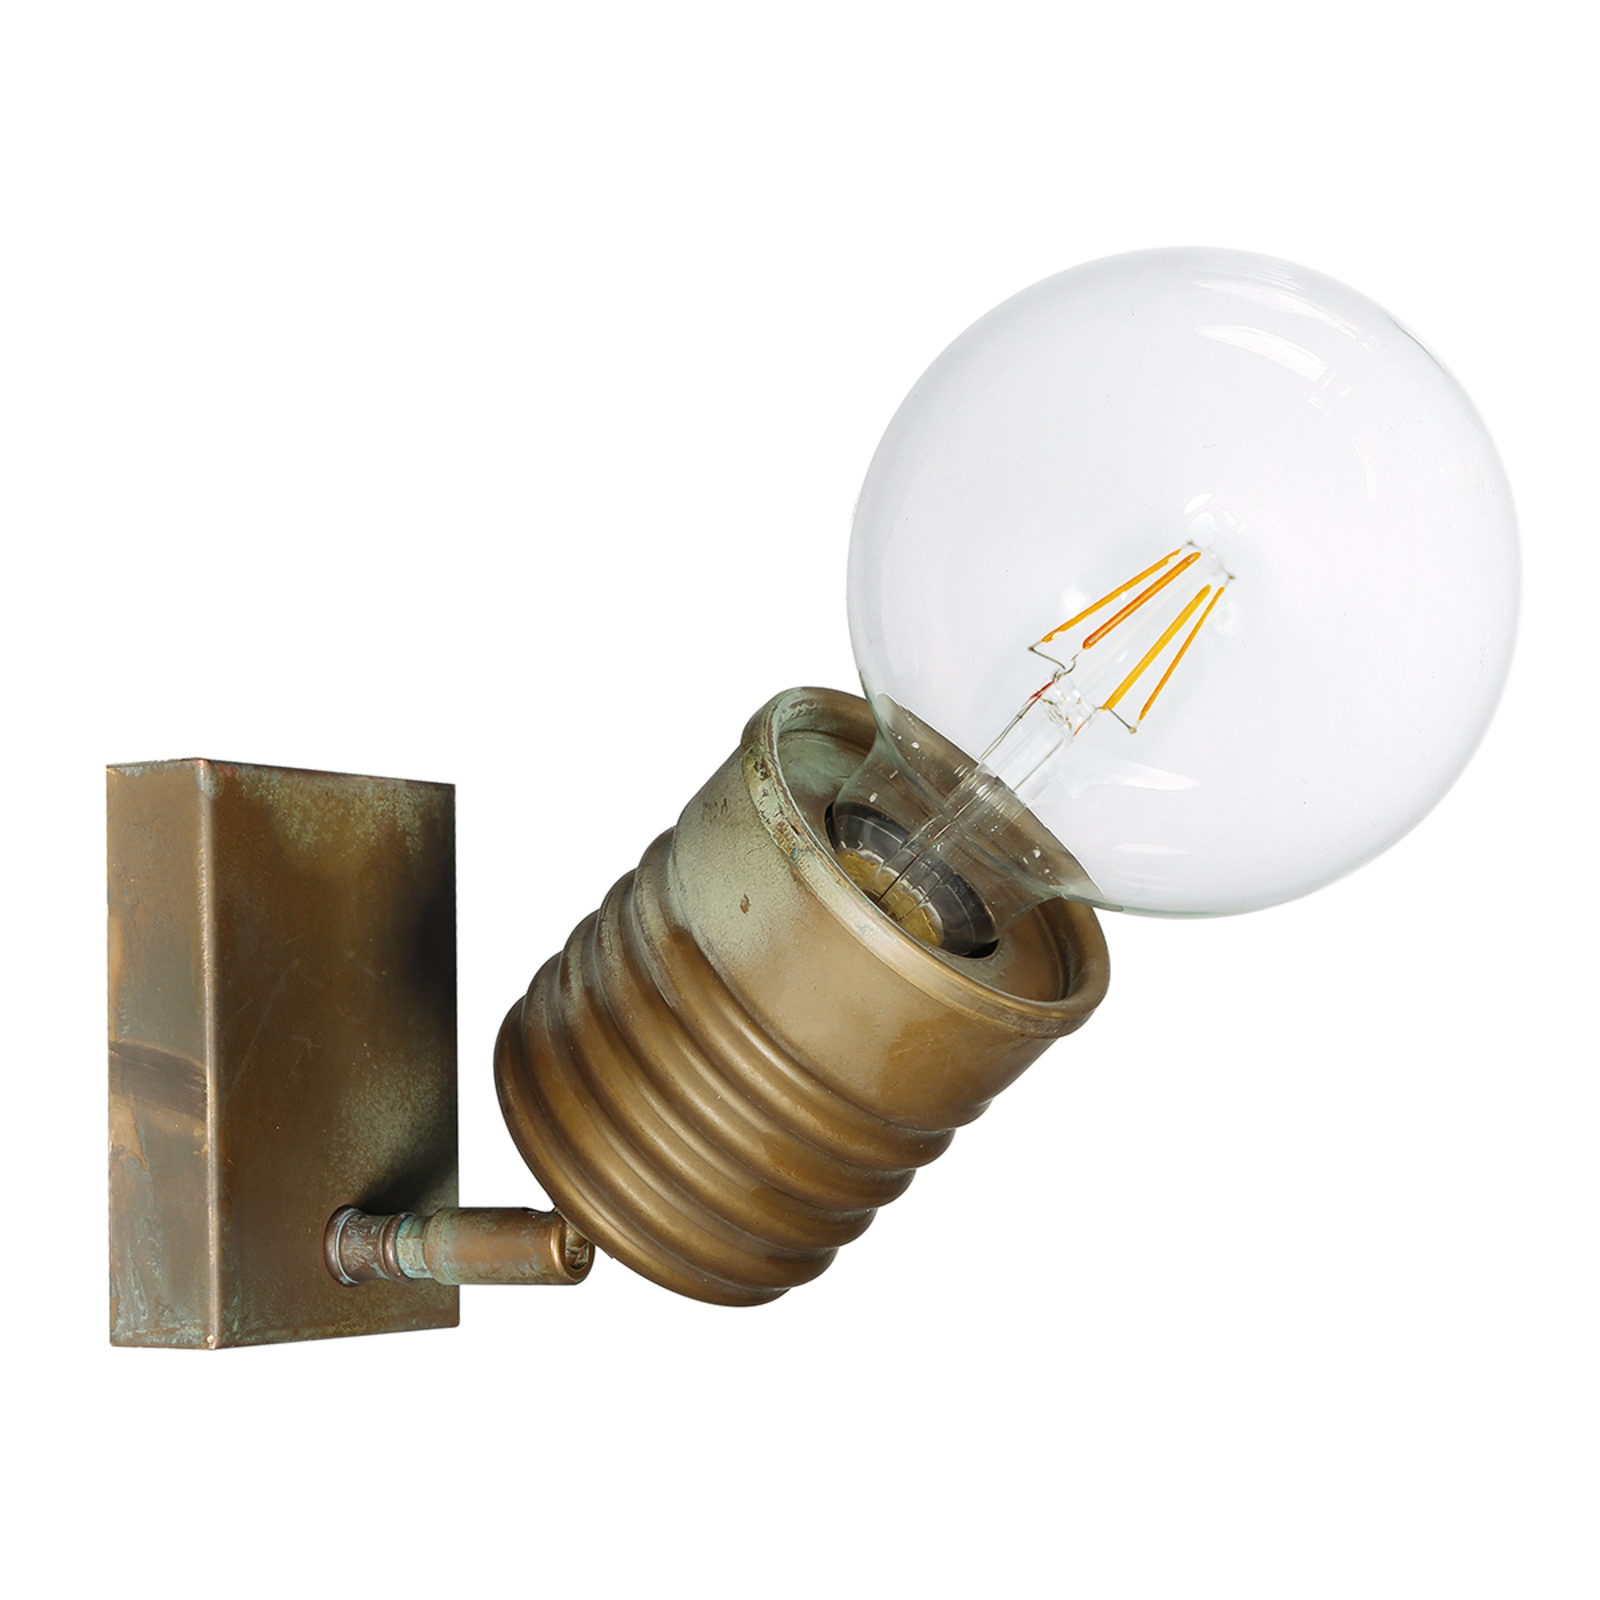 Orti wall light with joint, angular holder